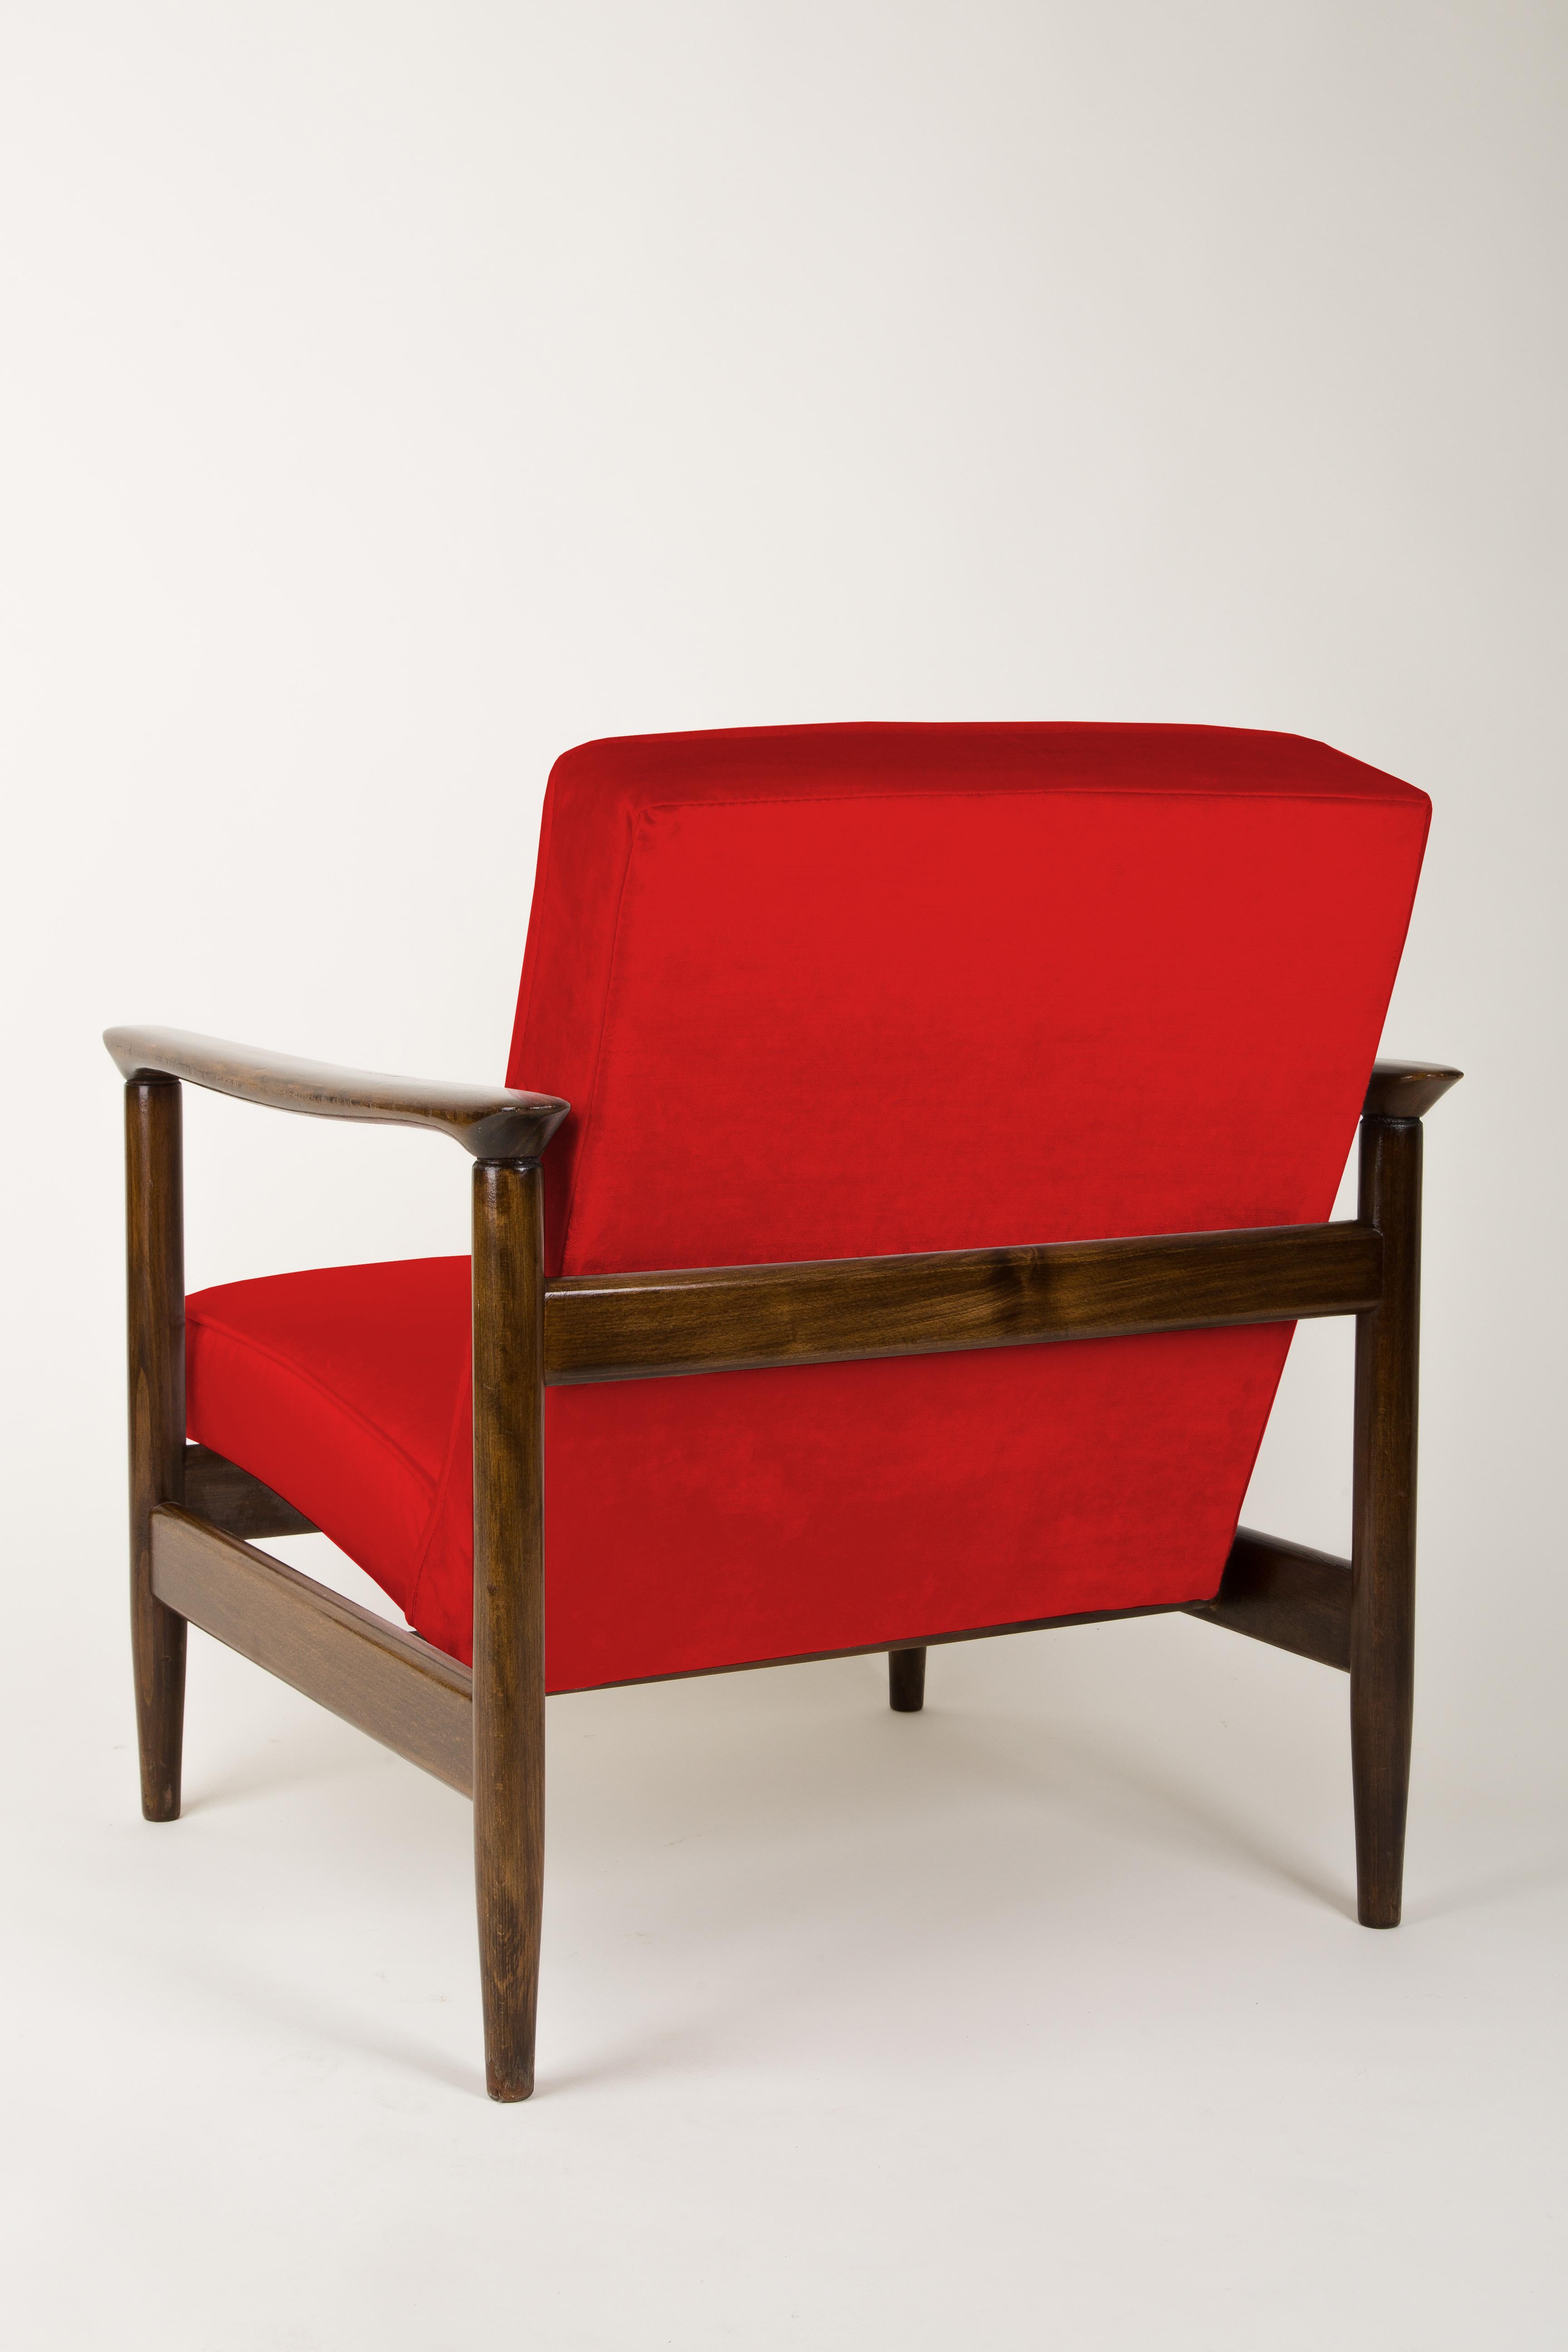 Pair of Red Armchairs, Edmund Homa, GFM-142, 1960s, Poland For Sale 1